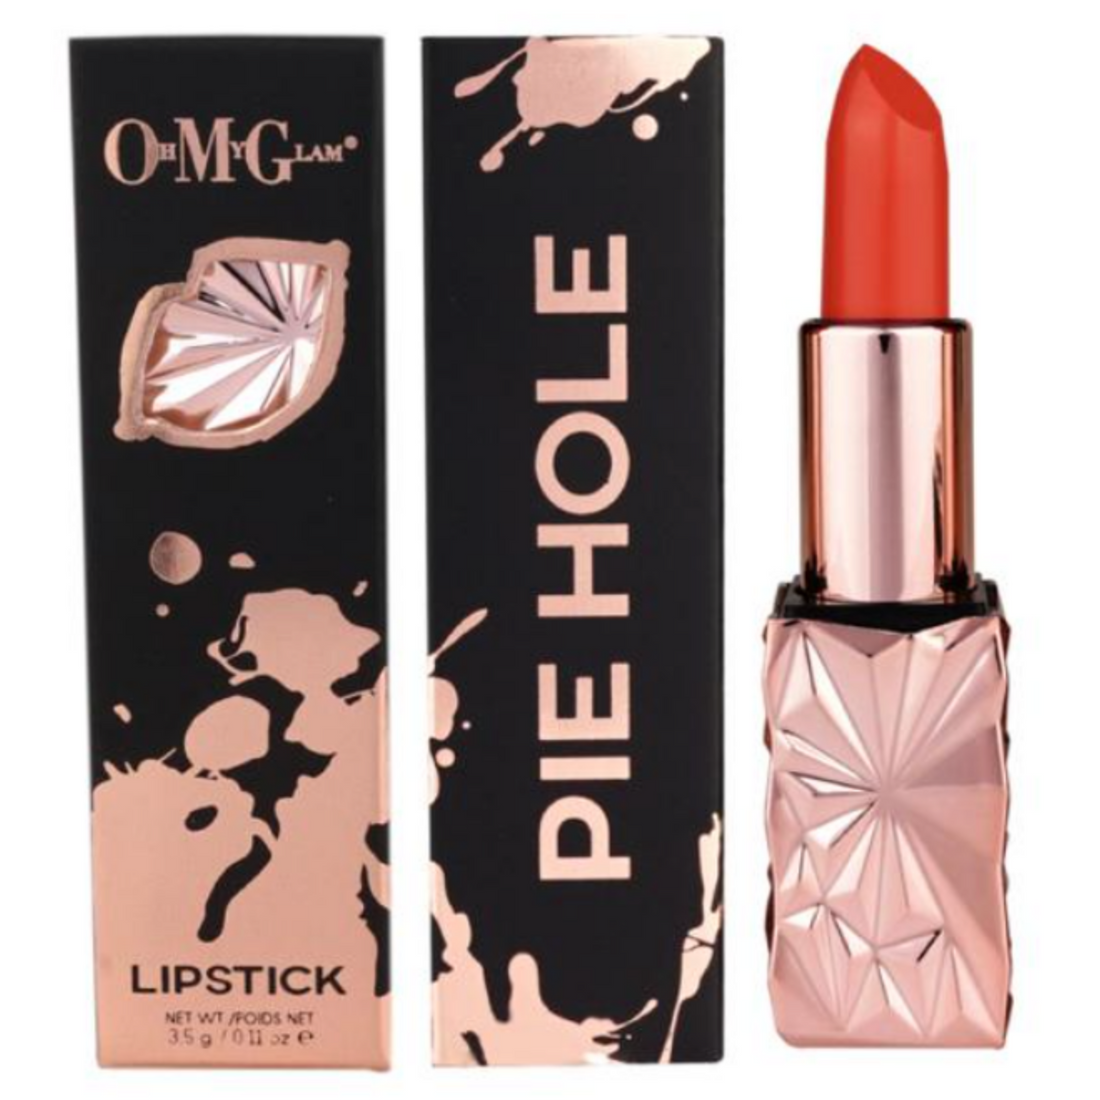 Oh My Glam MOUTH OFF! Lipstick